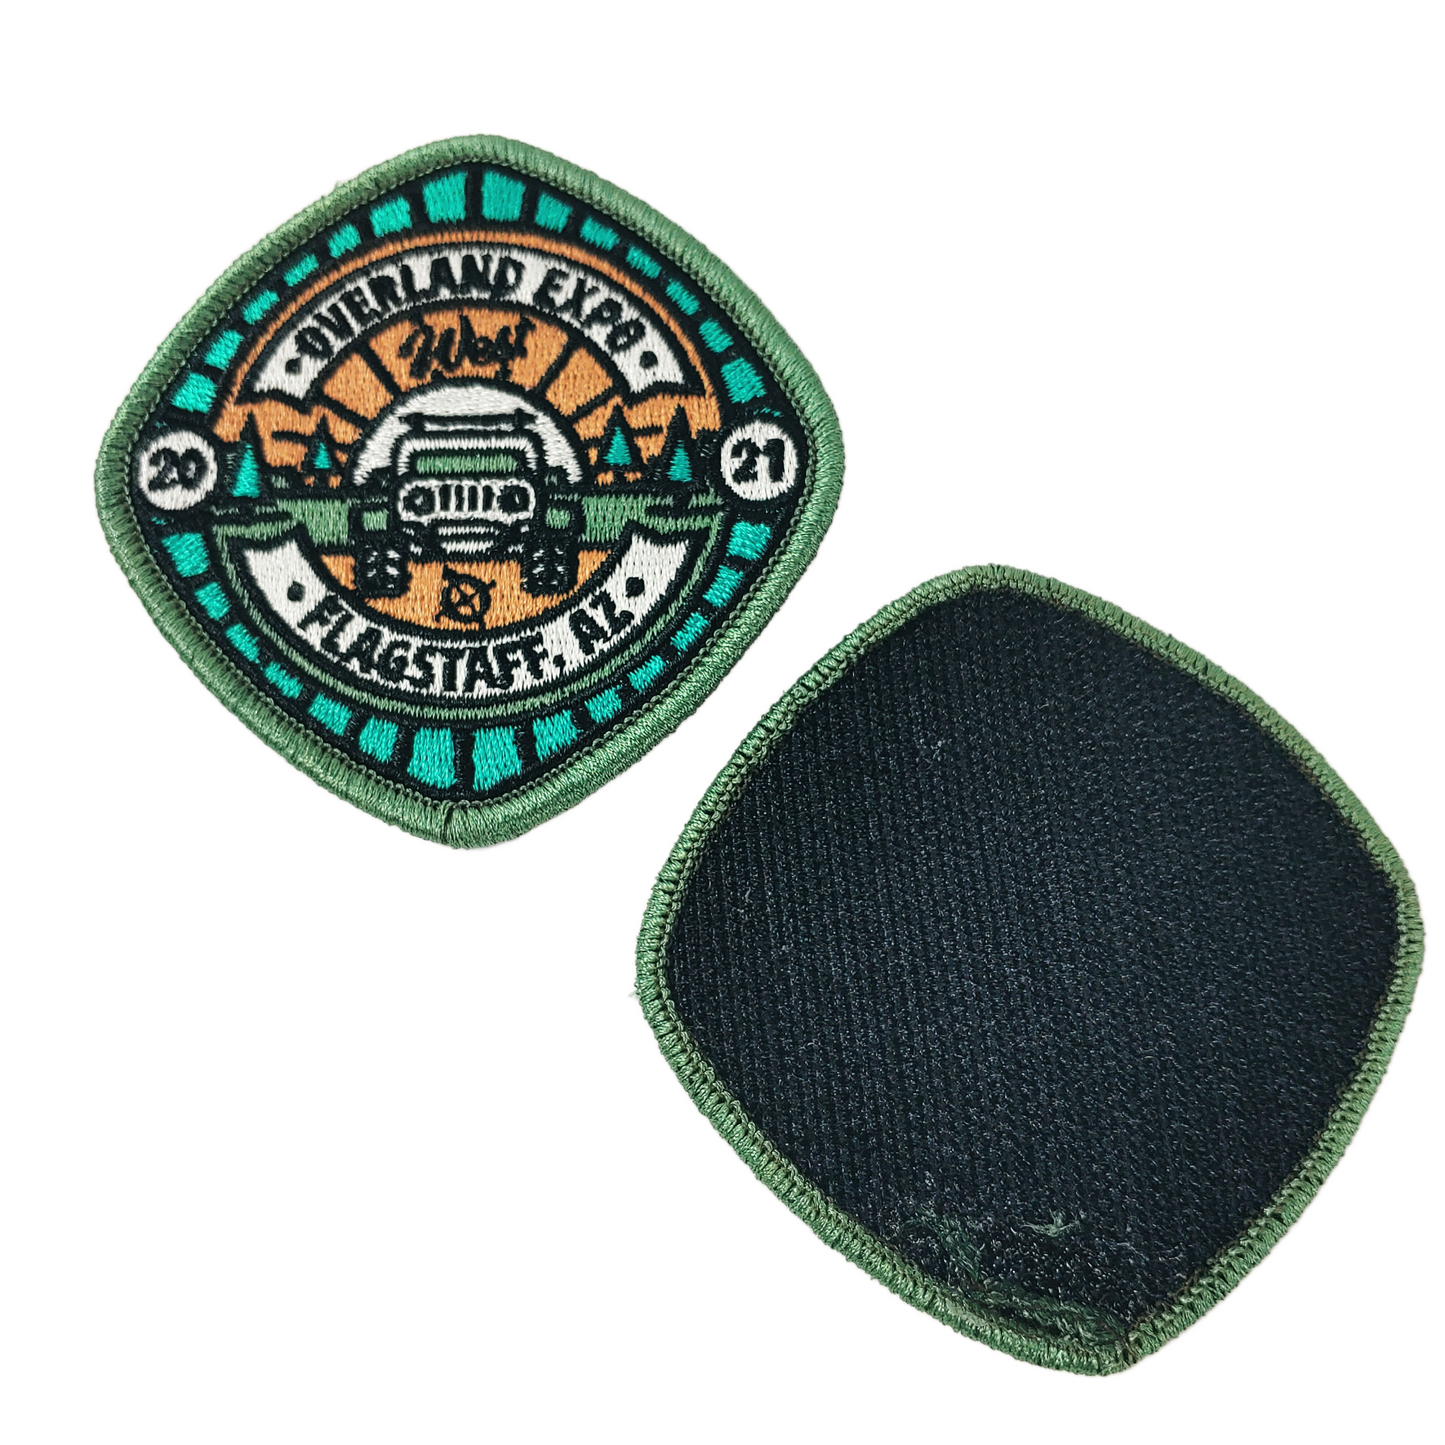 Overland Expo - Velcro Patch Pack - 15 Limited Edition Patches